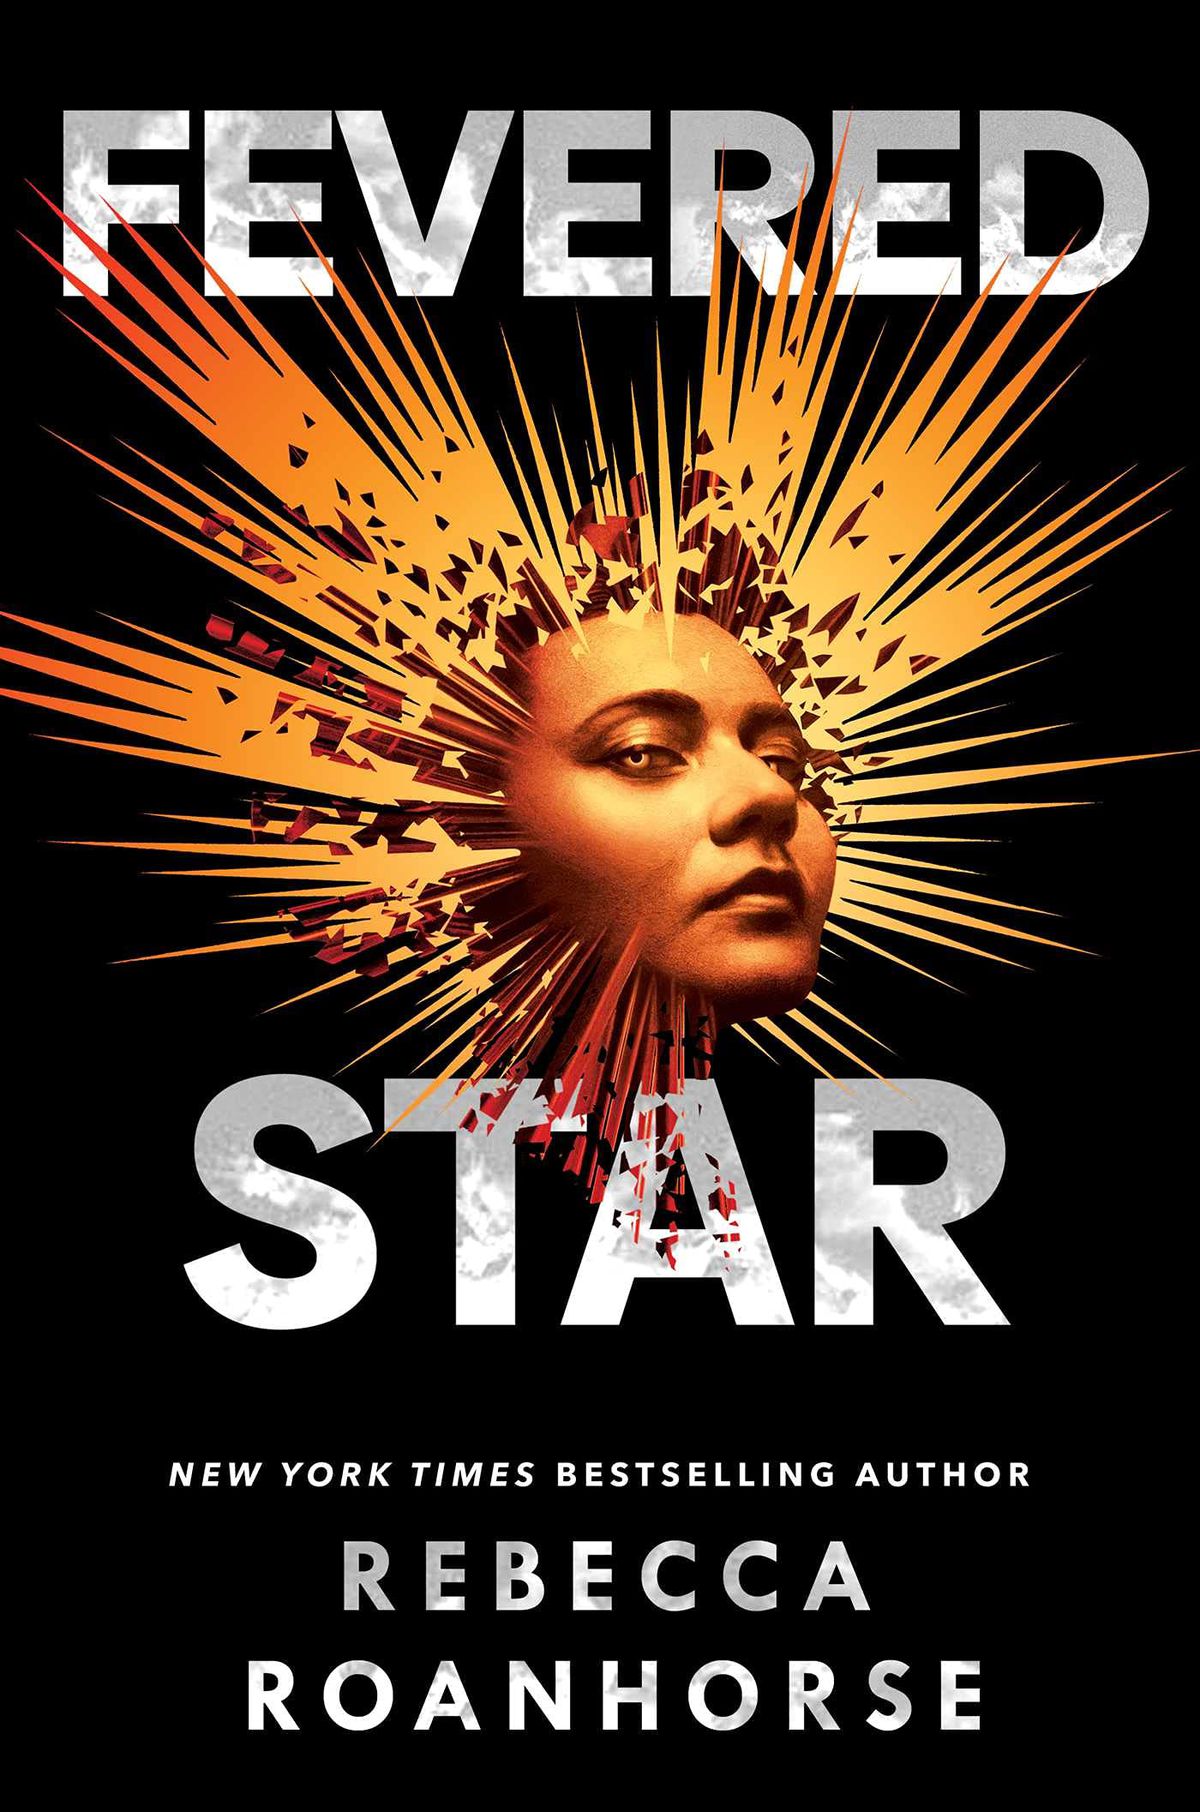 The cover for Fevered Star showing an illustration of a woman in the middle of a starburst